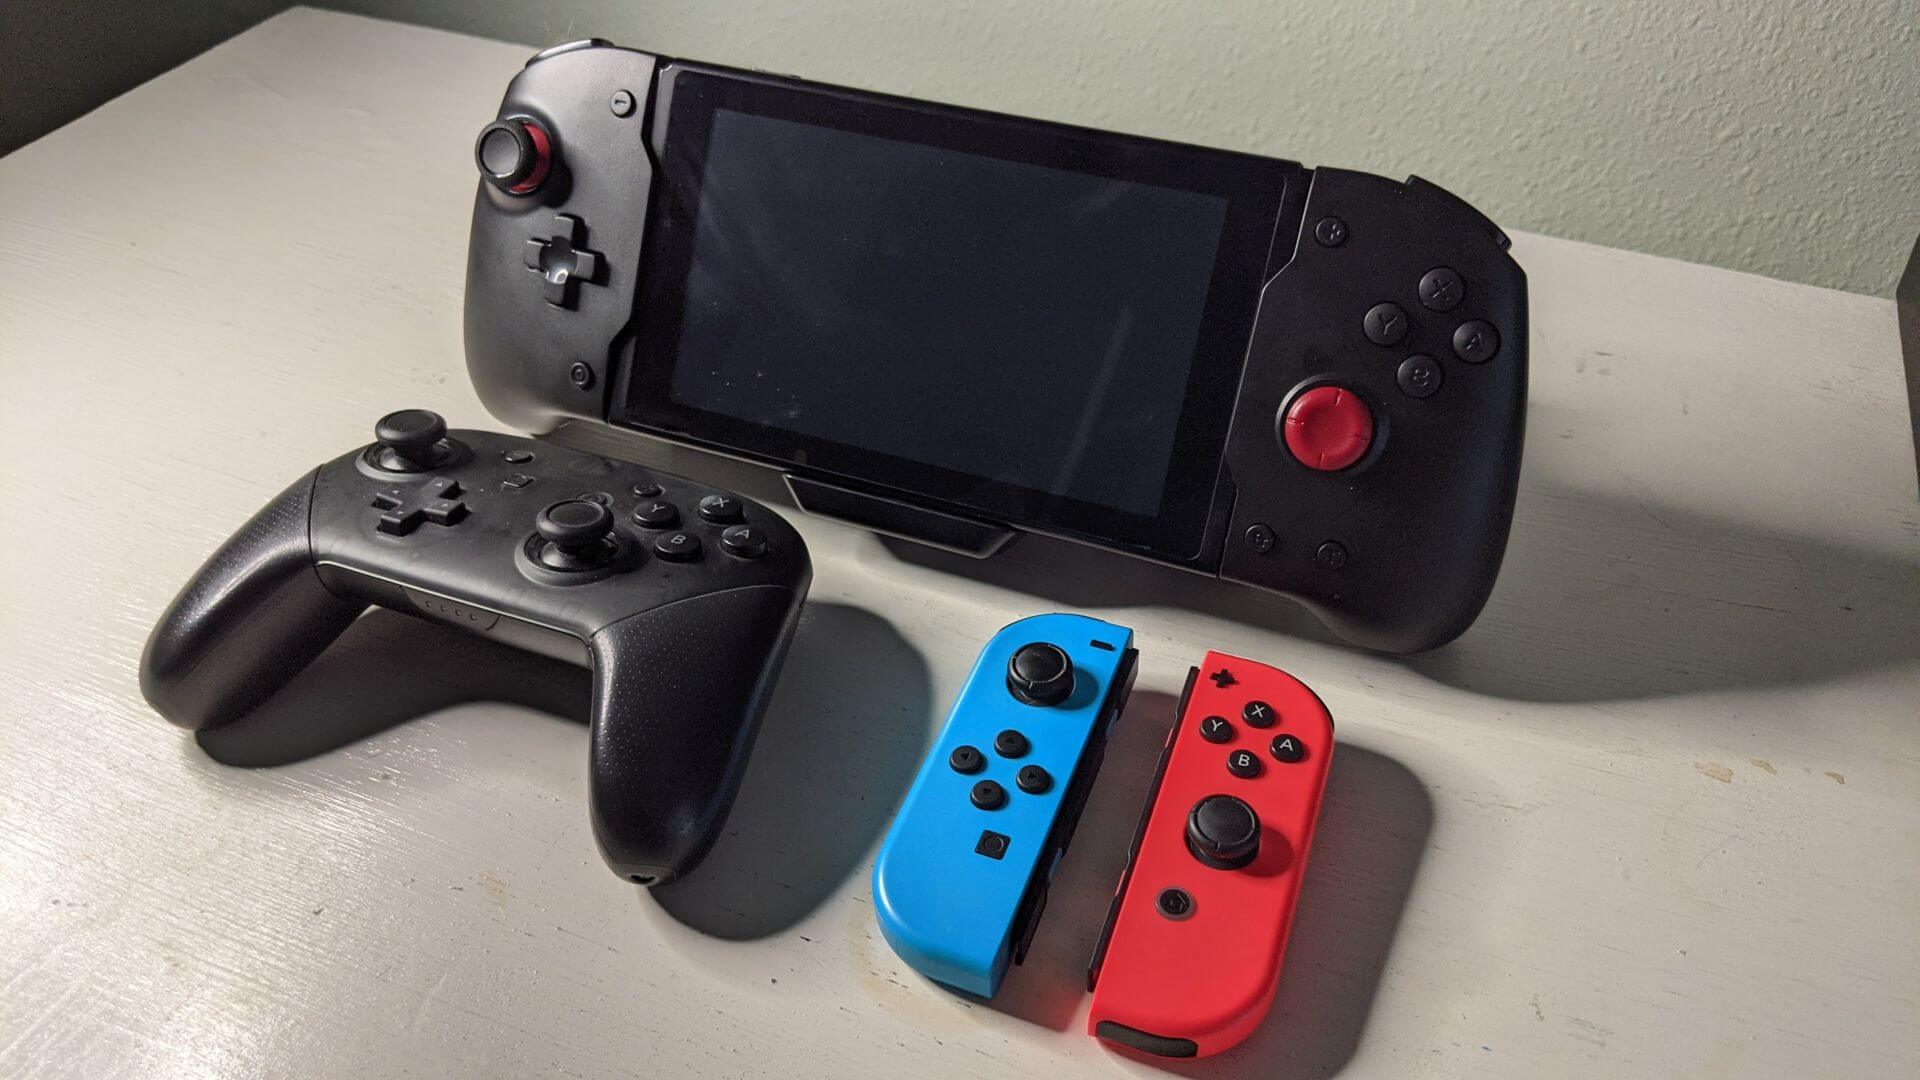 OIVO Switch Handheld Grip Controller Controller Comparisons